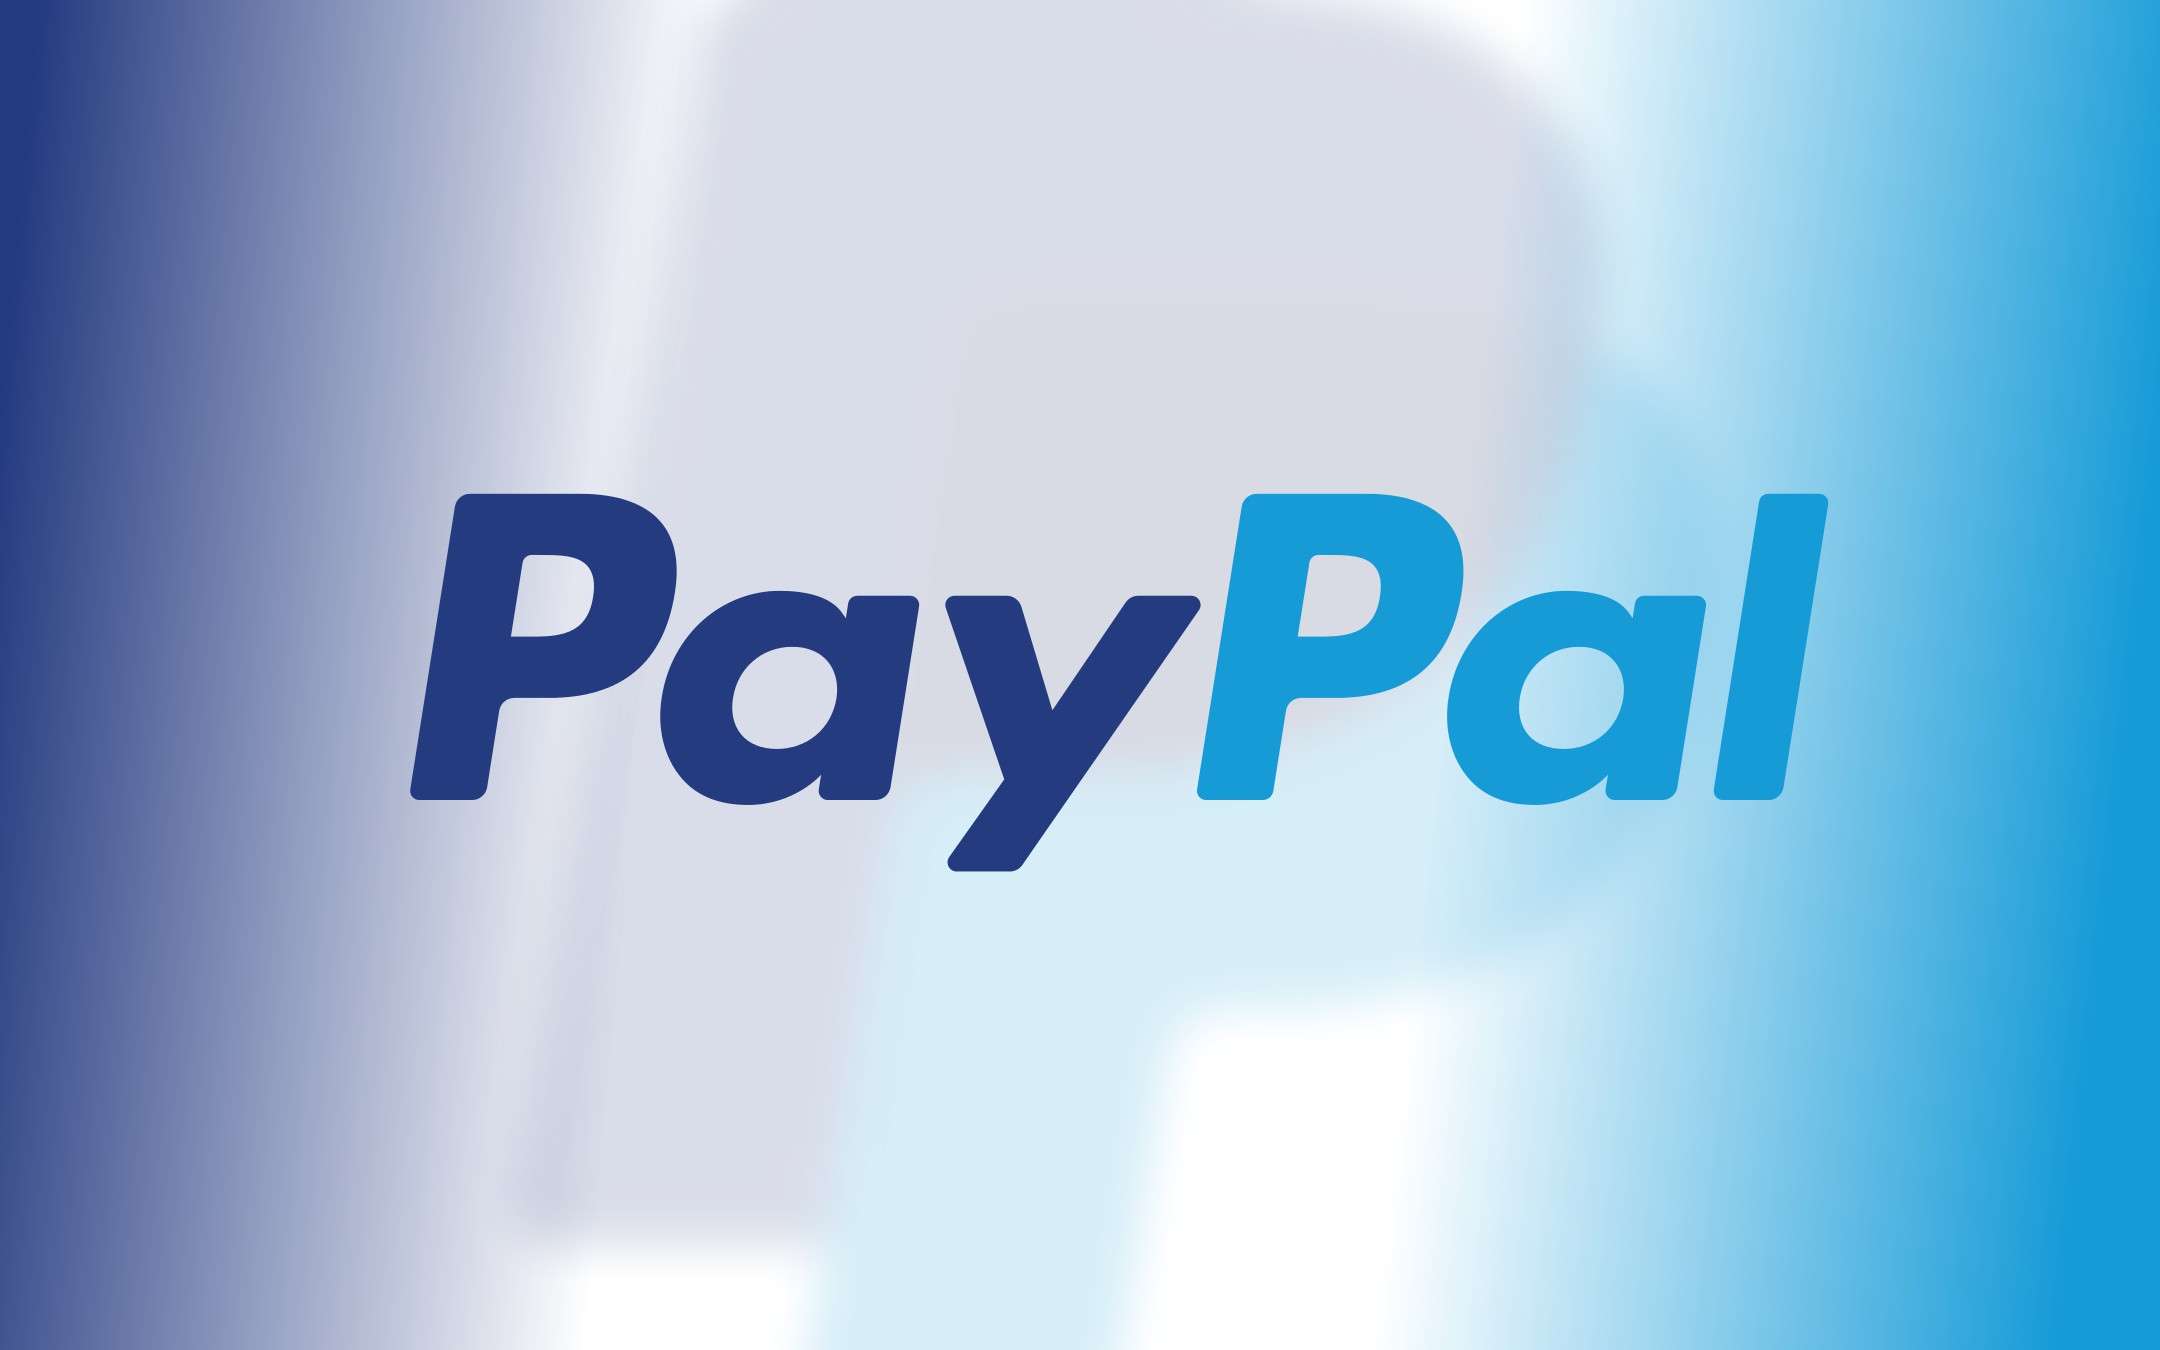 The golden moment continues for PayPal, a new record